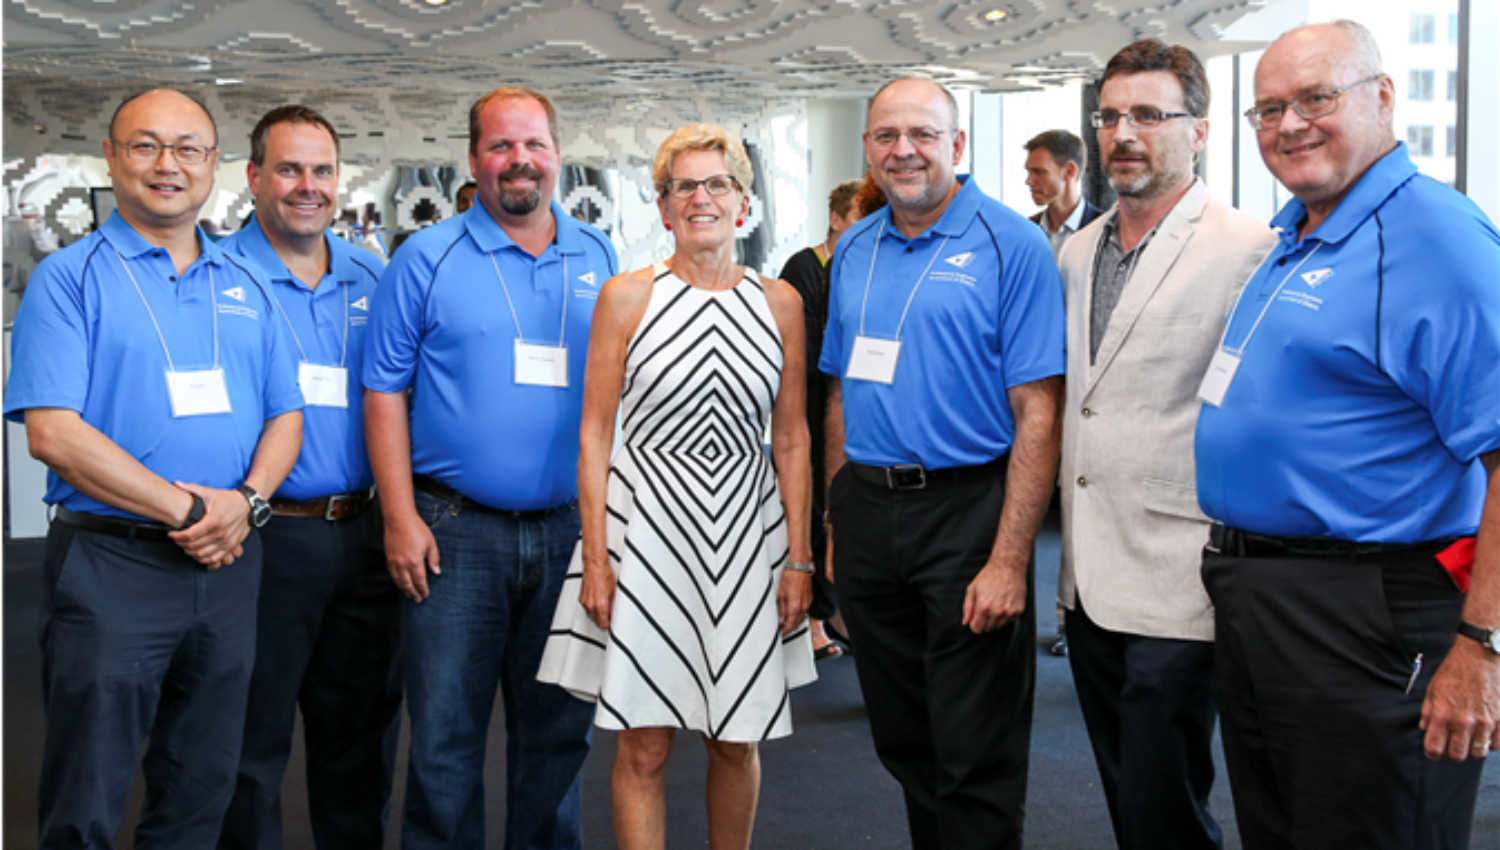 PROFESSIONAL ENGINEERS GOVERNMENT OF FORMER ONTARIO EXECUTIVE MEMBERS WITH PREMIER KATHLEEN WYNNE